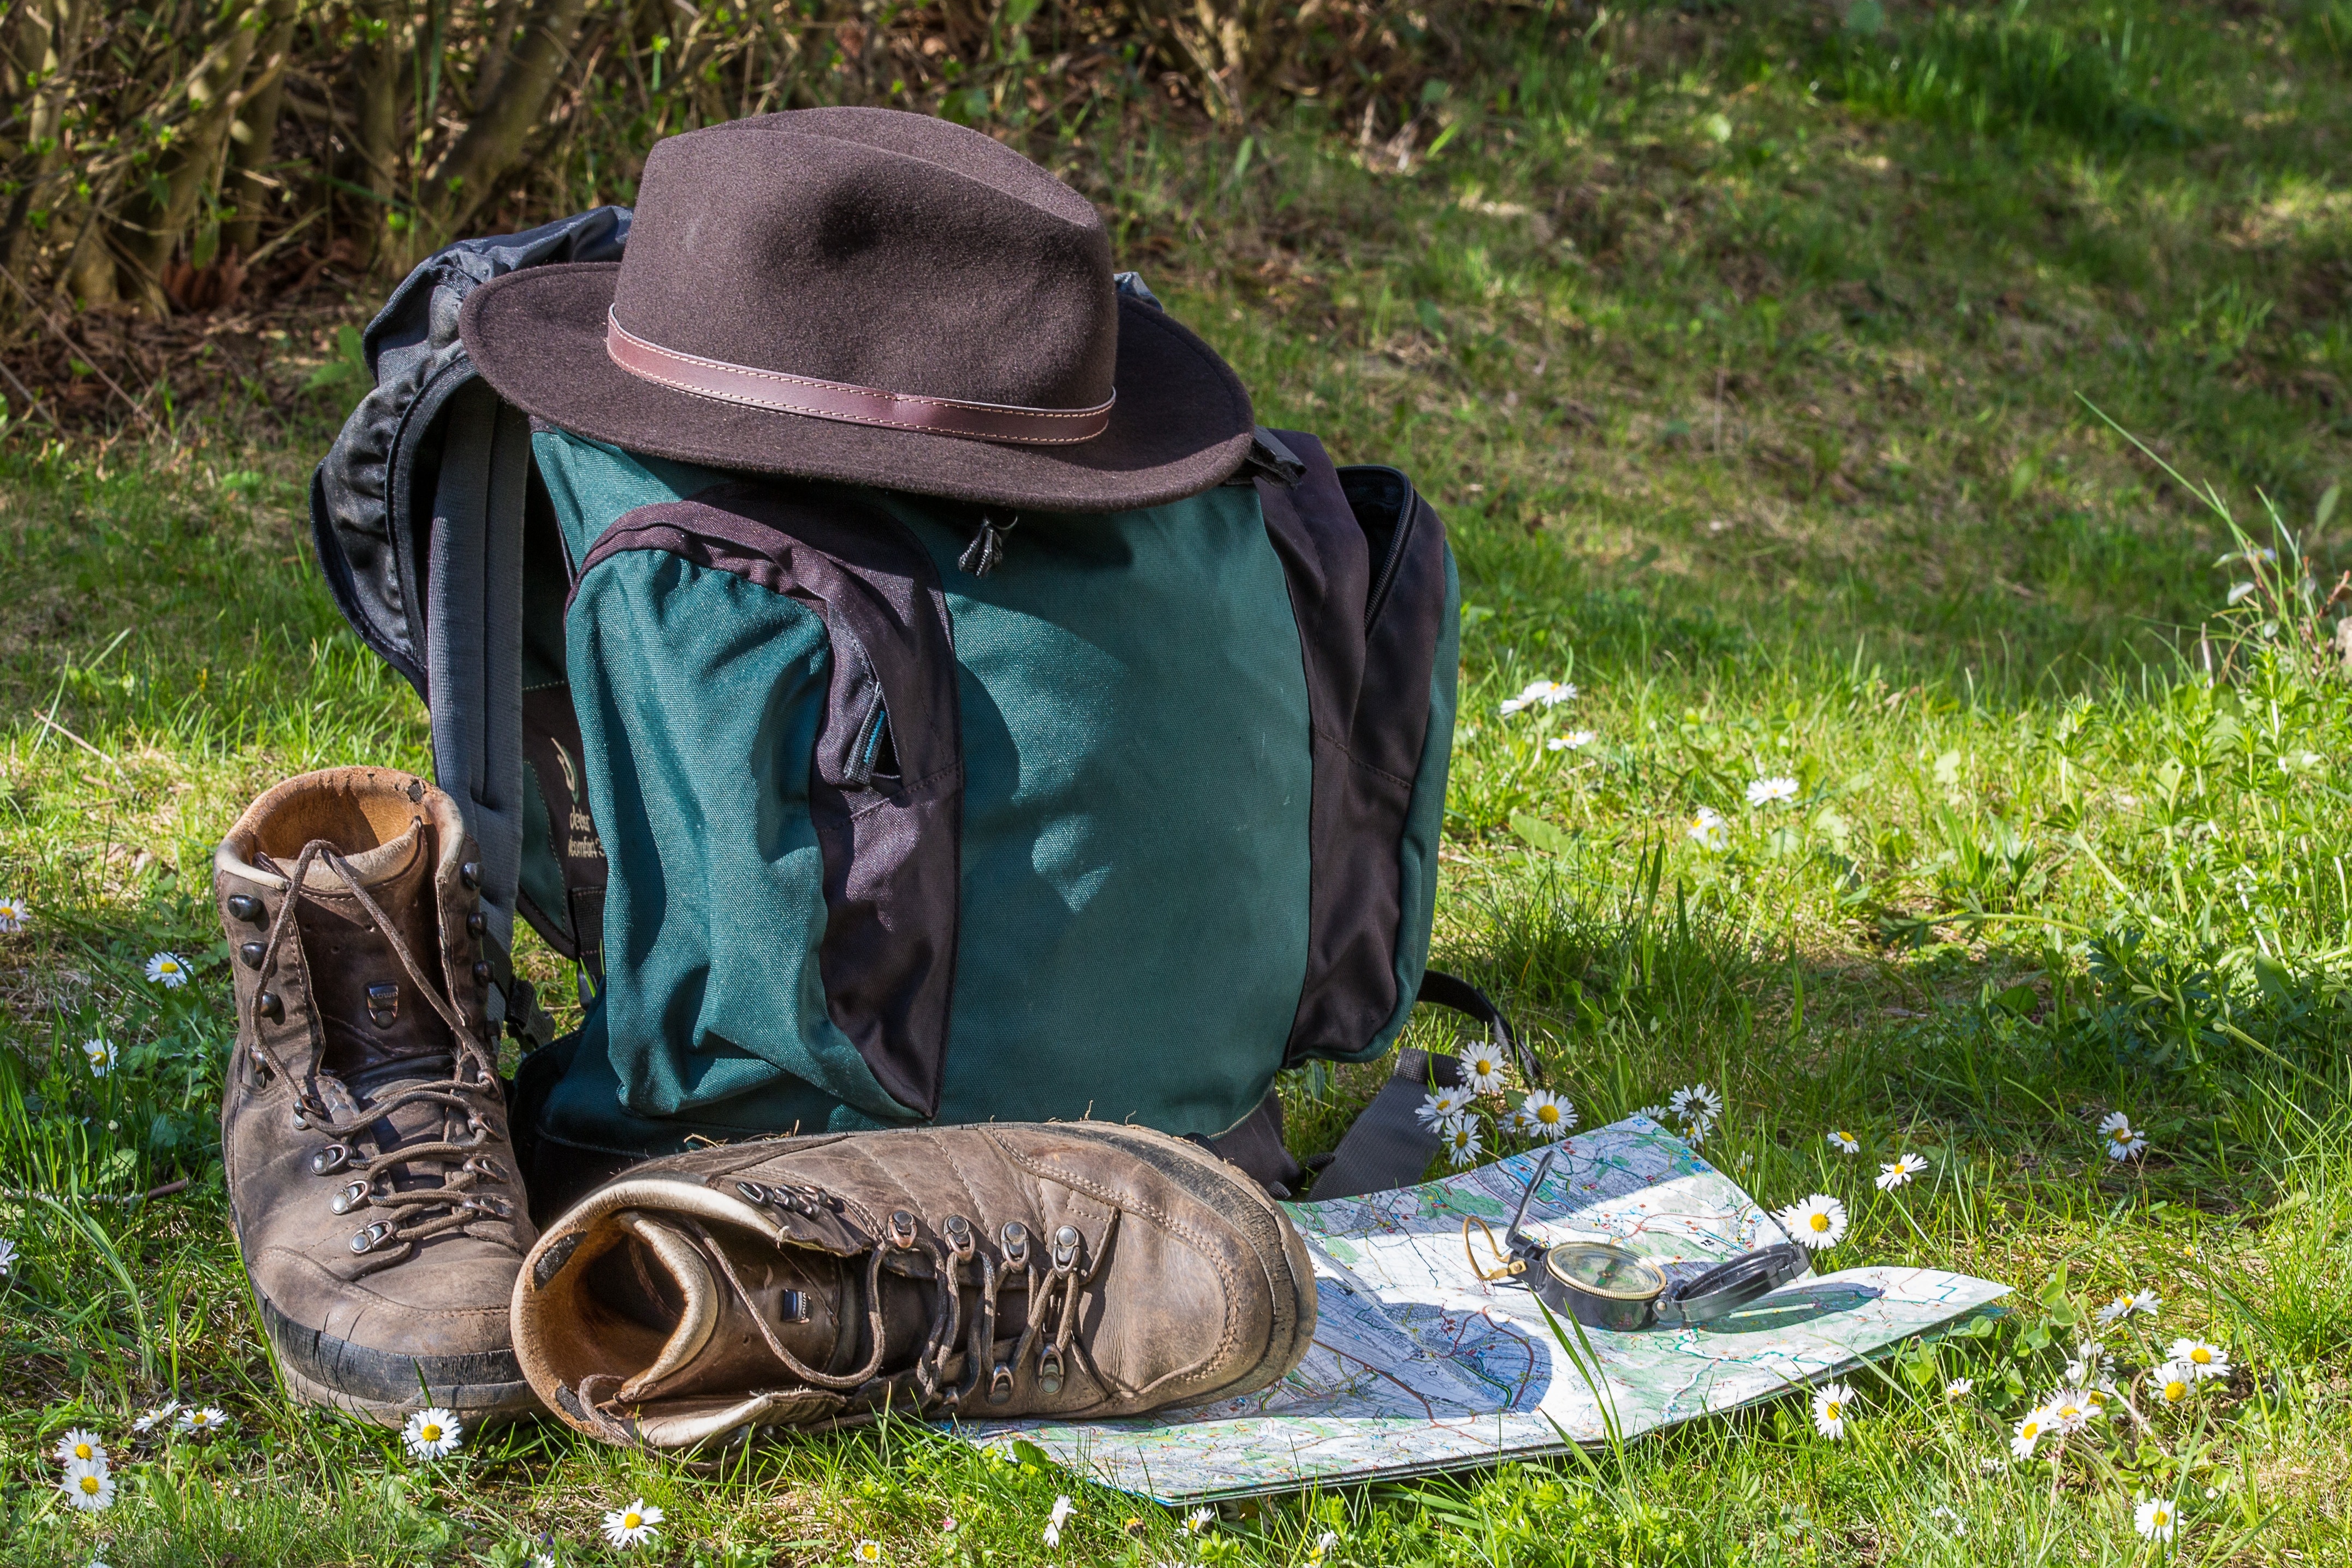 teal and blue backpack hat and brown leather hiking boots